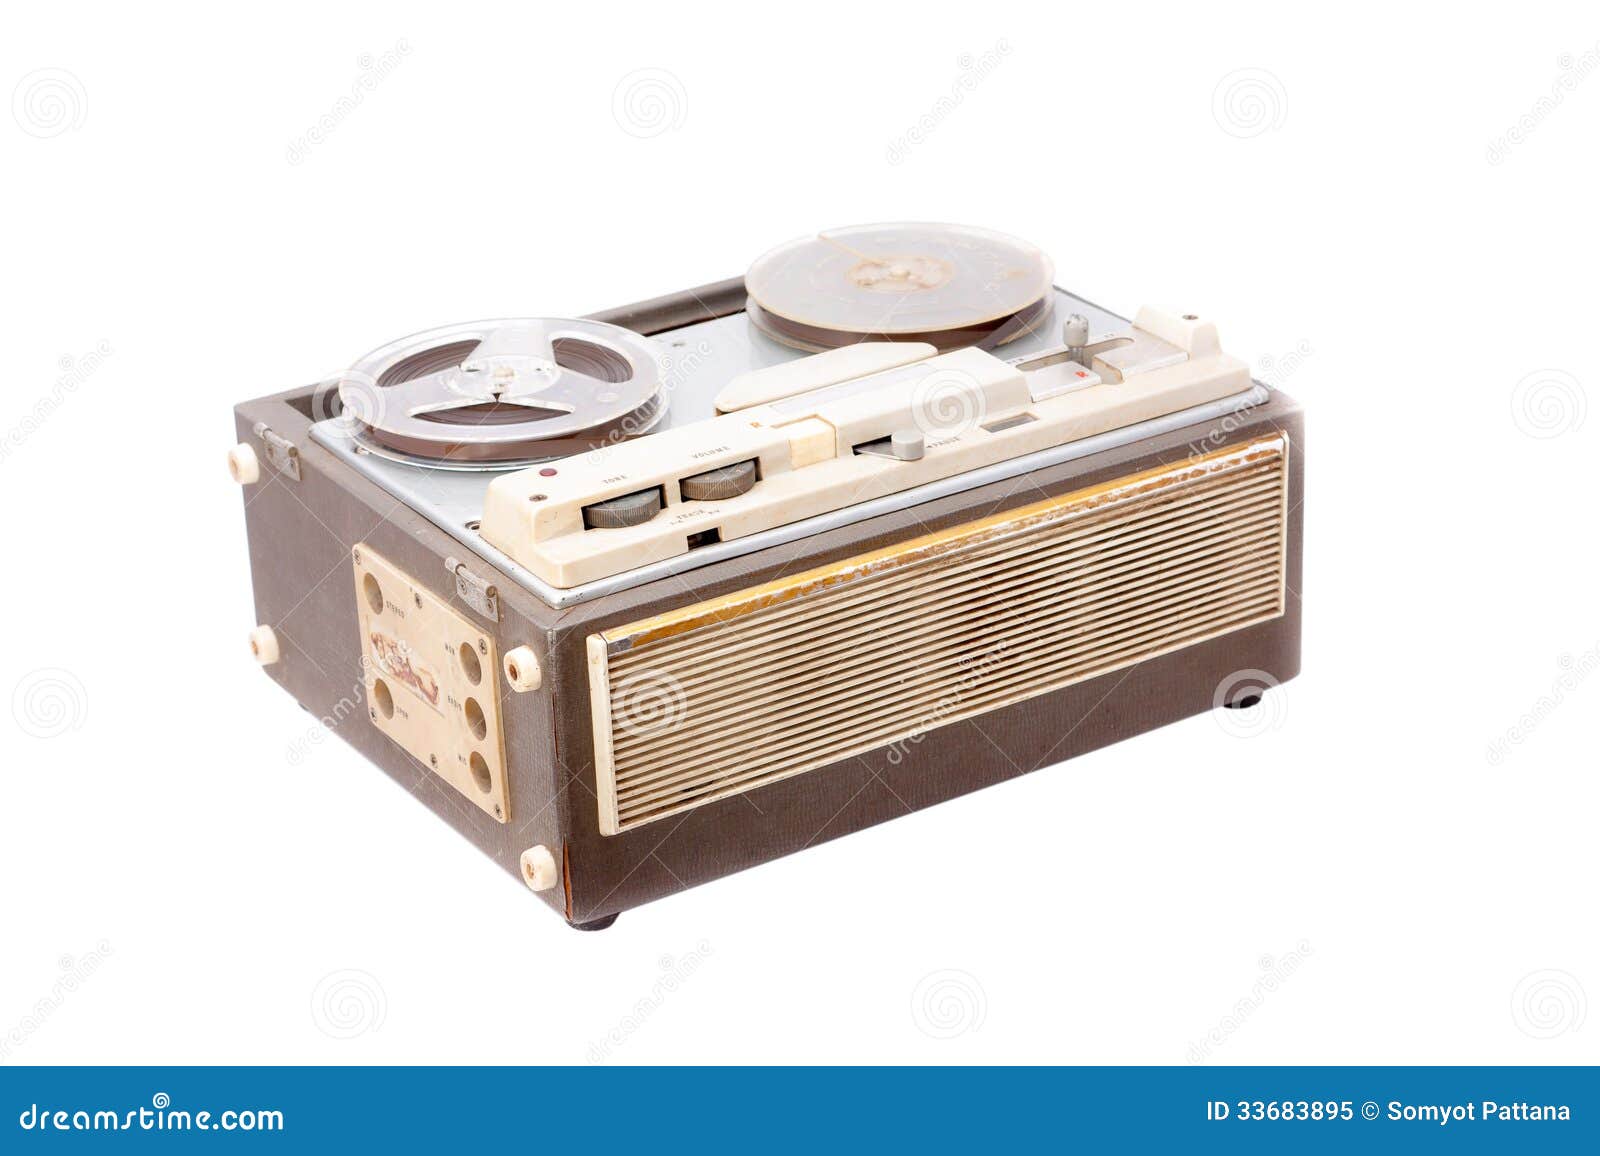 Old Portable Reel To Reel Tube Tape-recorder Stock Image - Image